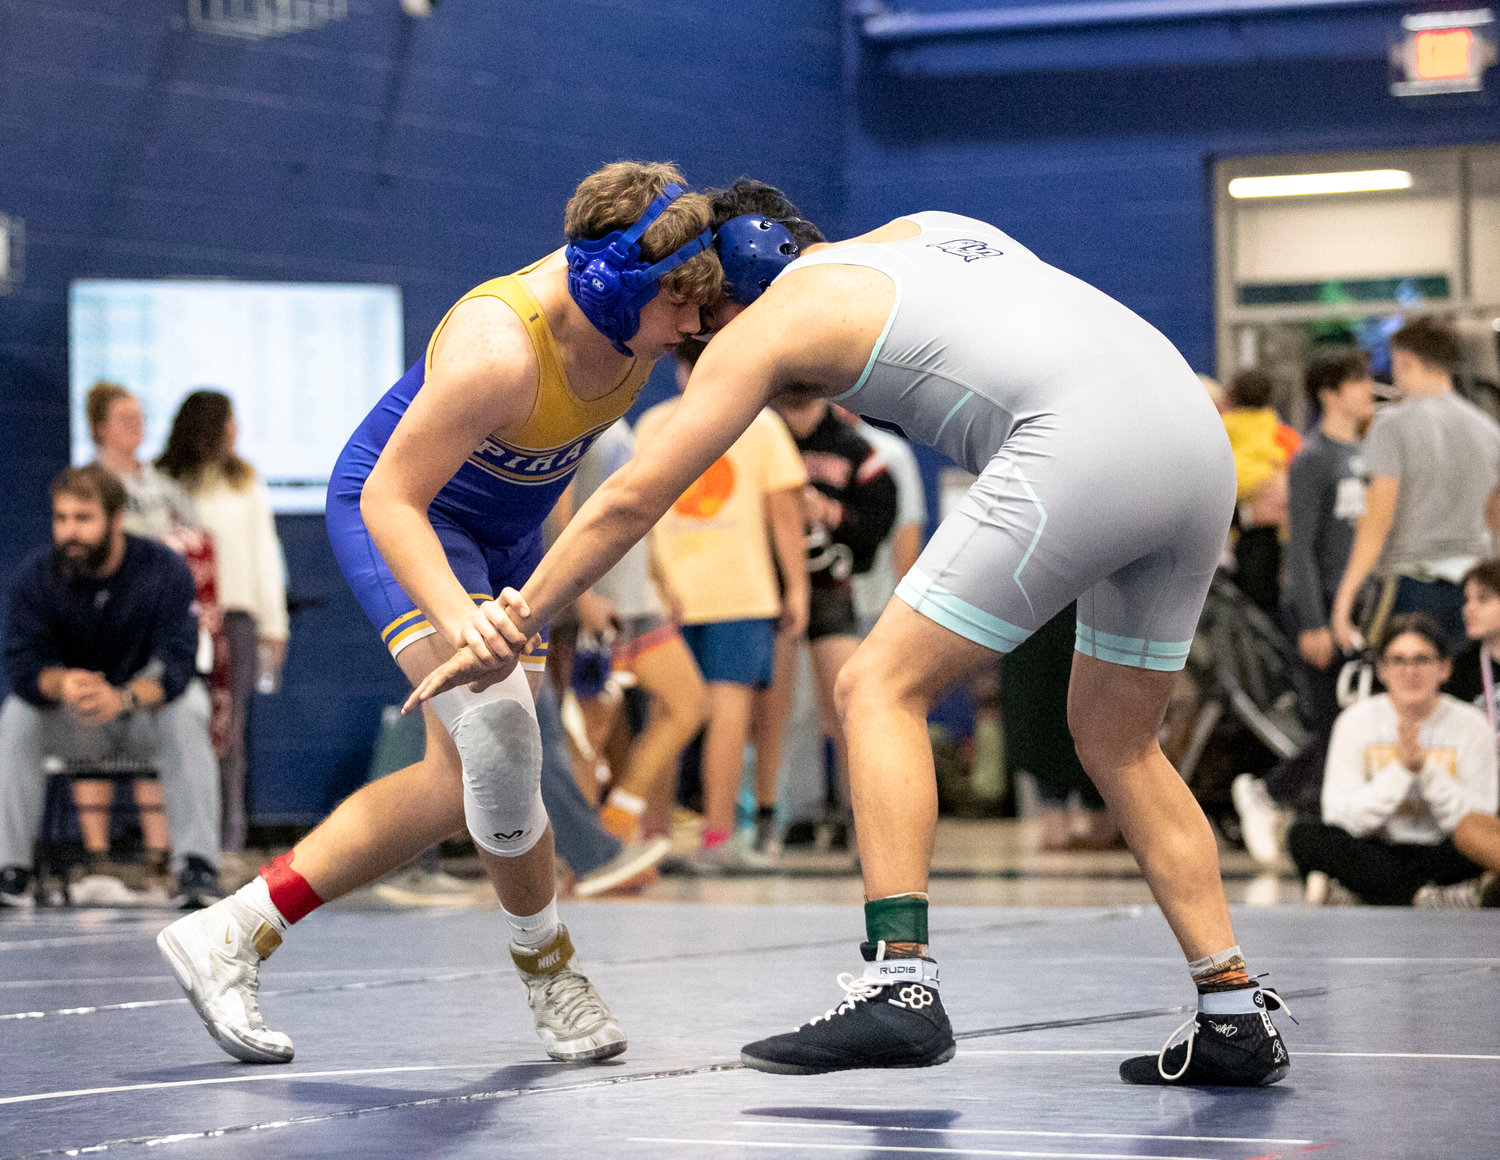 Fairhope’s Jordan Rugg and Gulf Shores’ Lucas Salcedo battle for hand position during the quarterfinals of the 195-pound class during Friday’s Baldwin County Championships at Gulf Shores High School. The Pirates finished with three all-county distinctions.